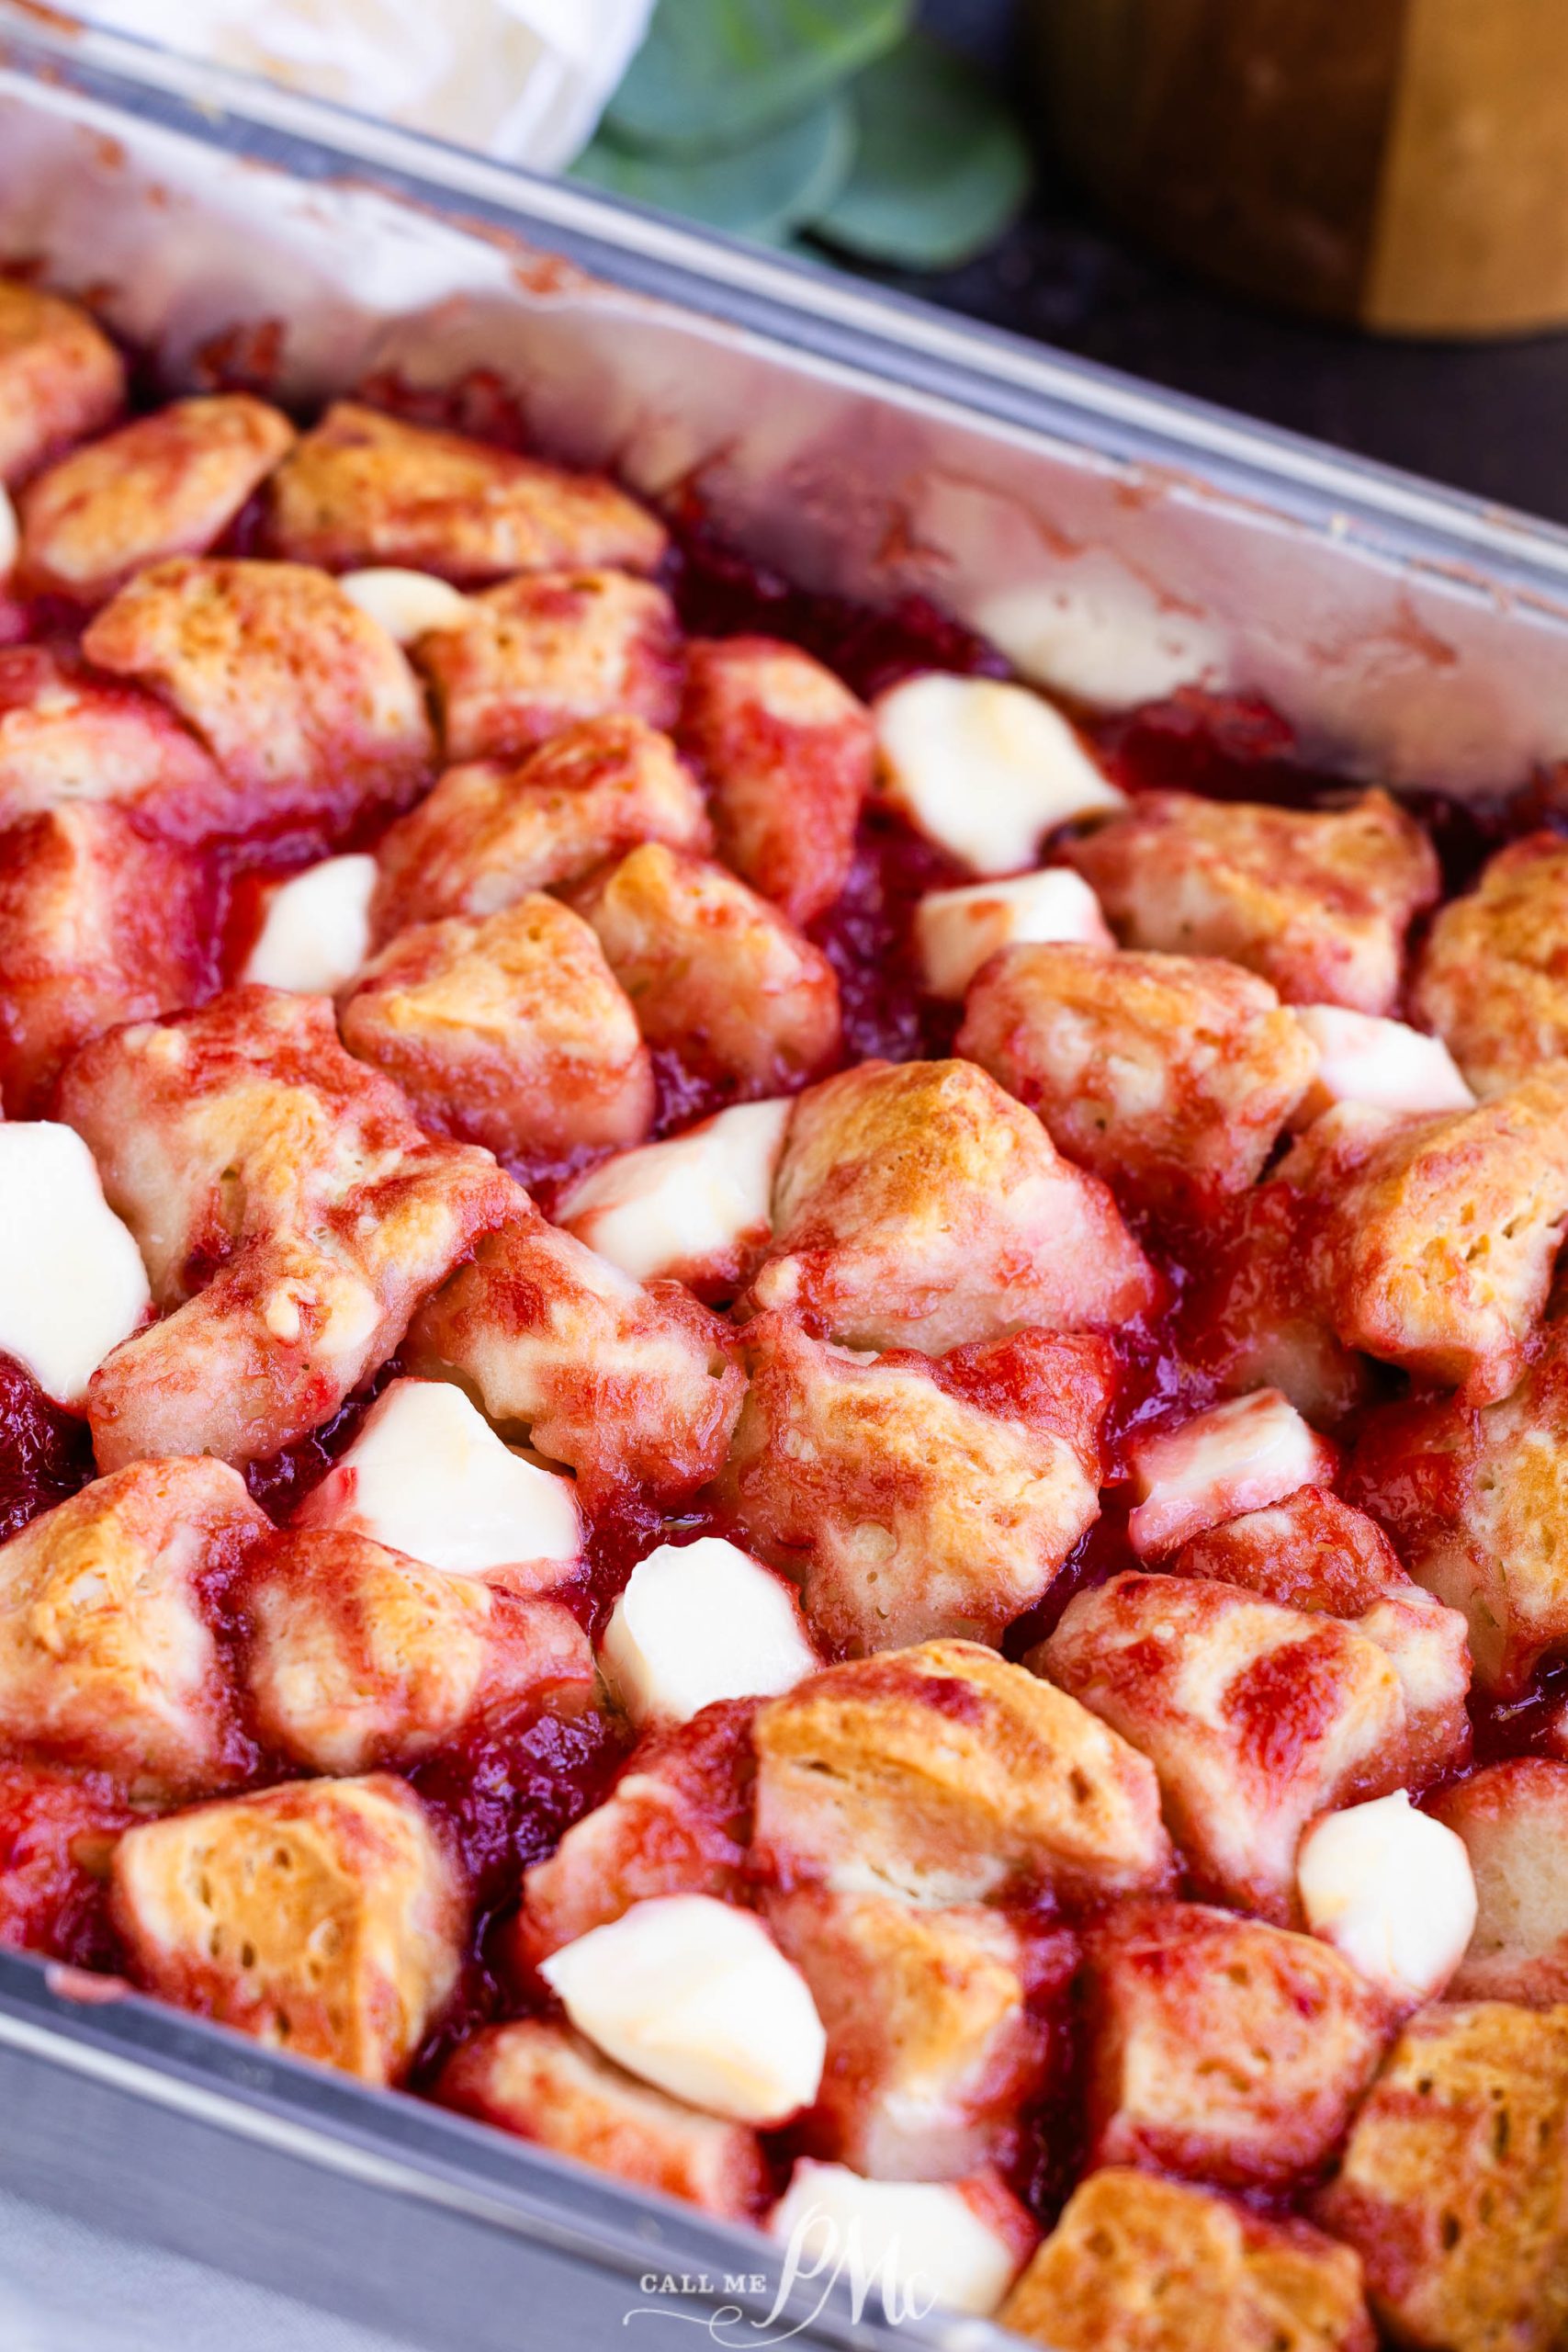 A close-up of a baking dish with a strawberry shortcake casserole, featuring golden-brown biscuit pieces and melted white chocolate over a strawberry sauce.